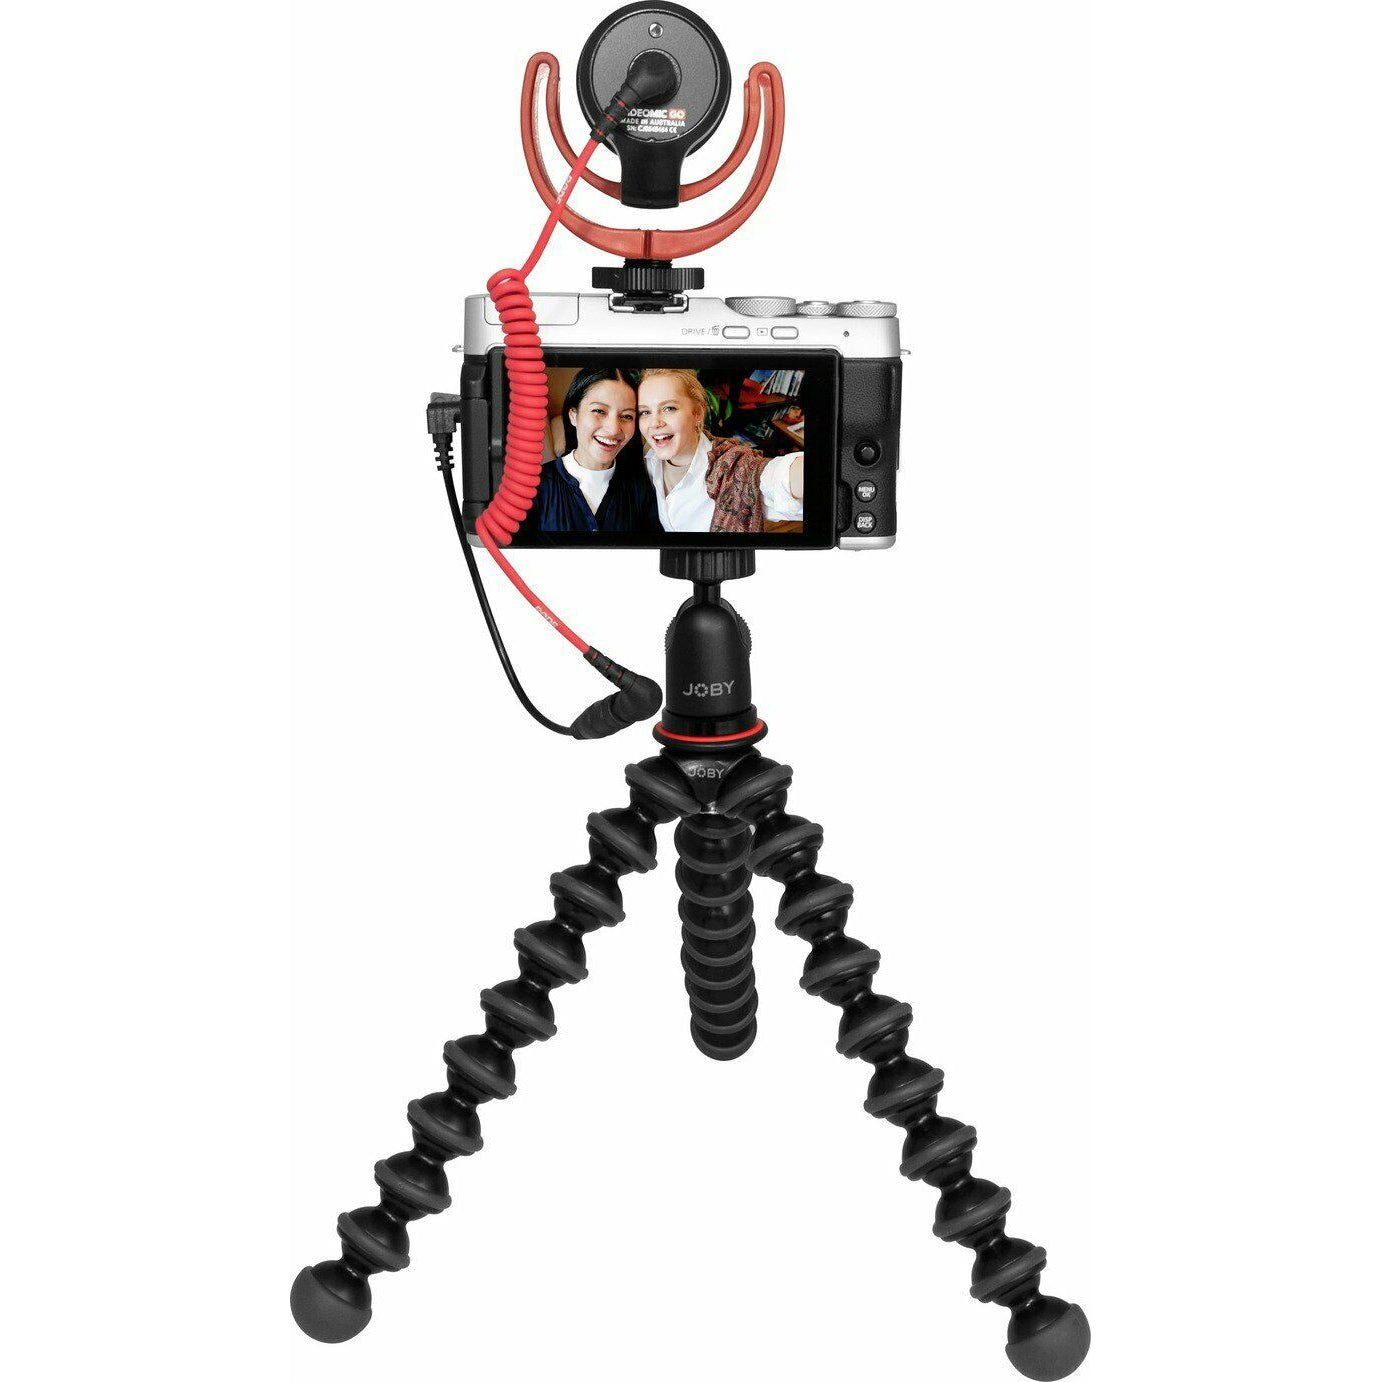 Fujifilm X-A7 Vlogger Kit with XC 15-45mm OIS Lens, Microphone, Joby Gorillapod & Memory Card